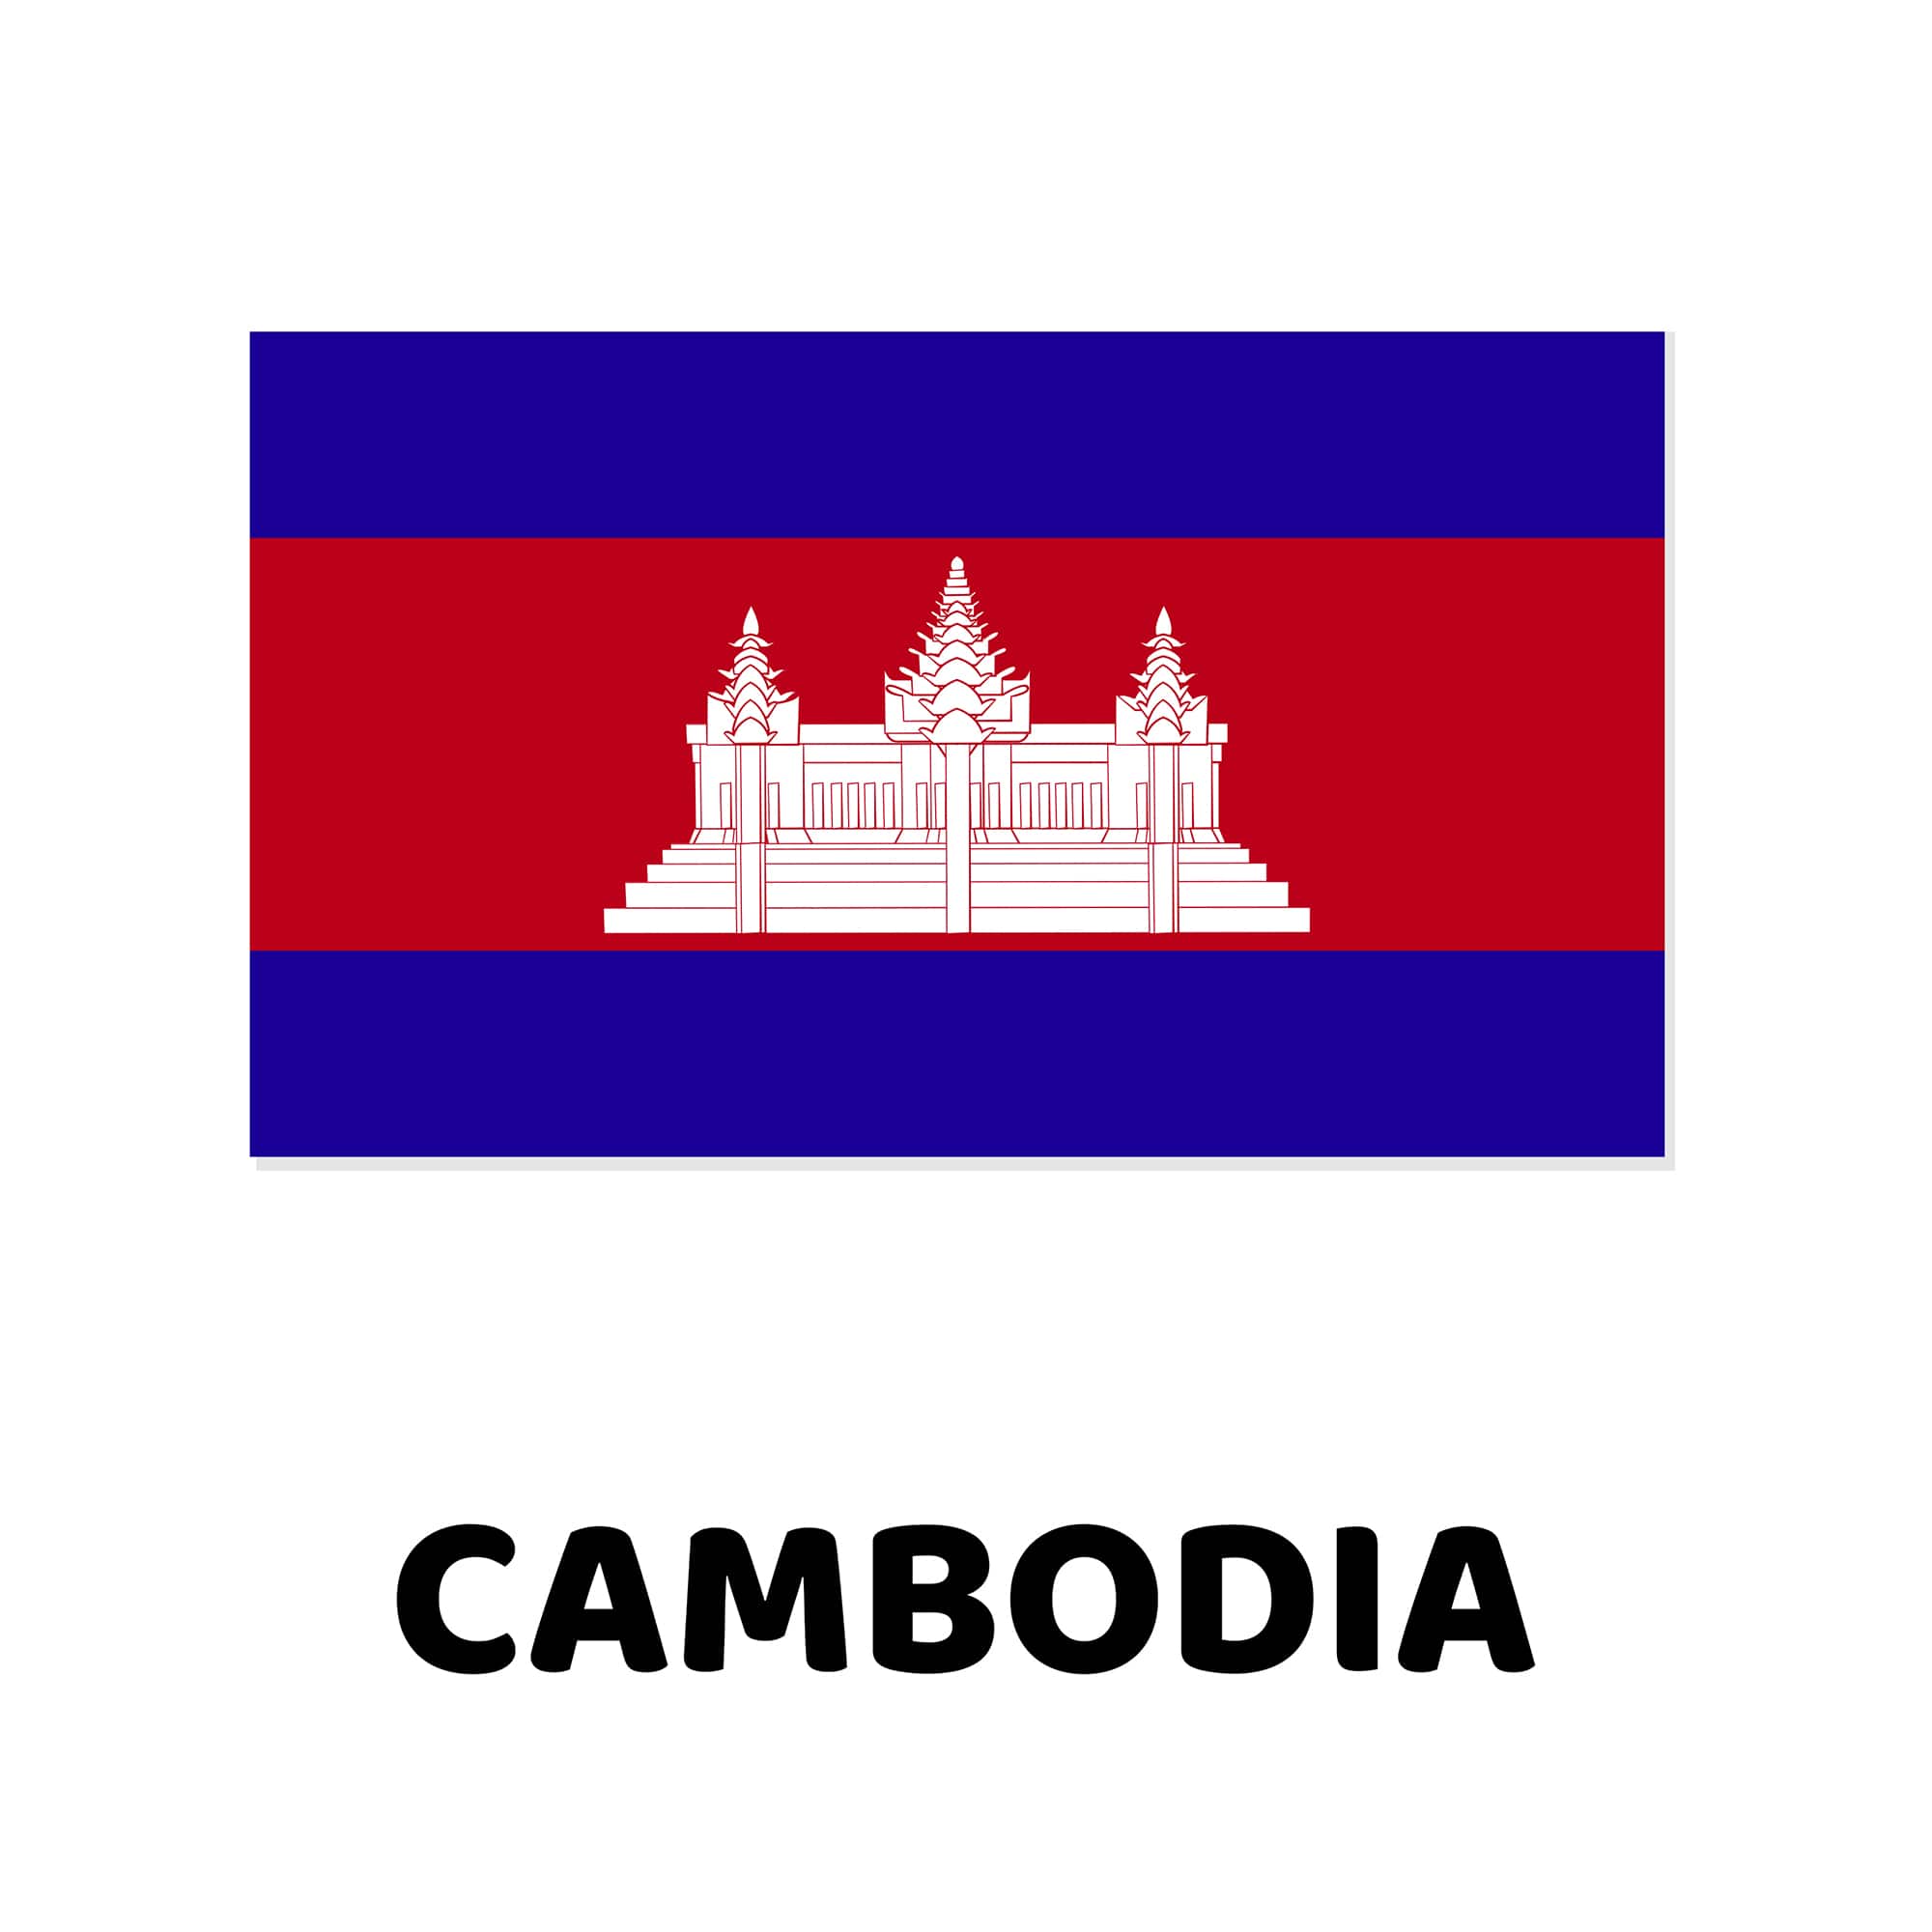 Cambodia Country flag vector graphics for free download in ai, eps10 and svg format